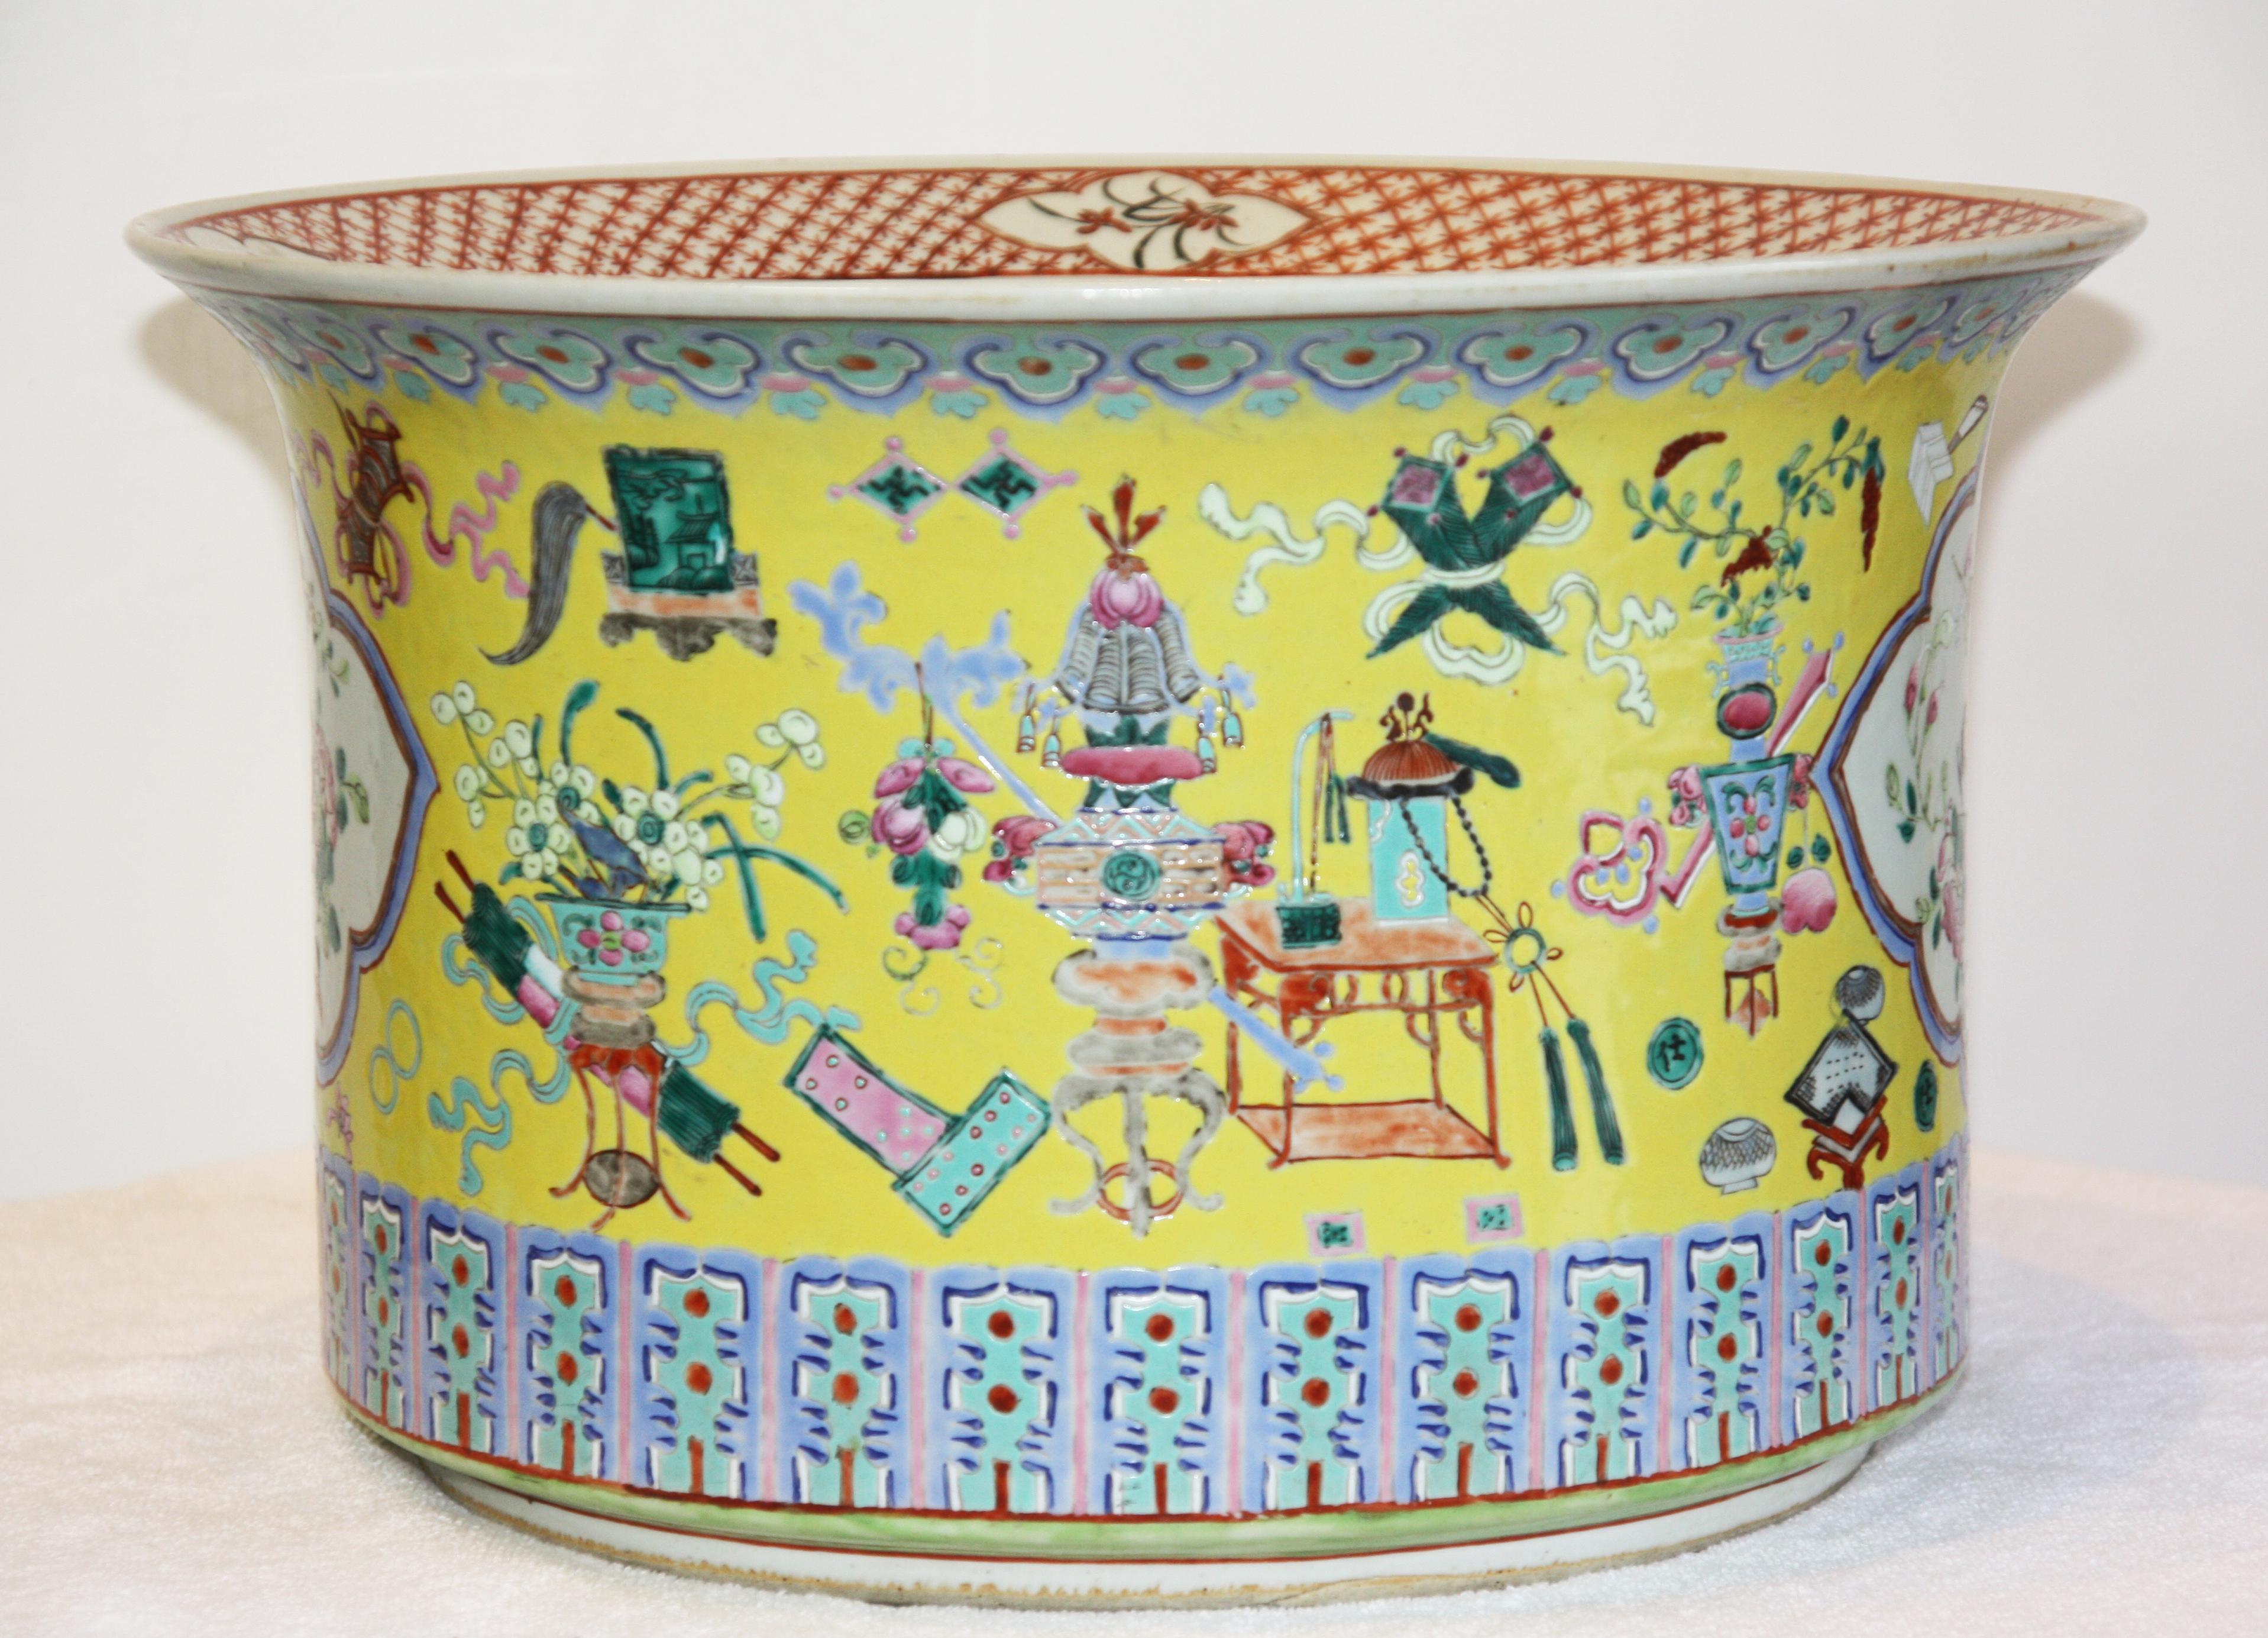 Large, hand-painted yellow jardinière with design band around the top, bird and floral imagery around the centre.